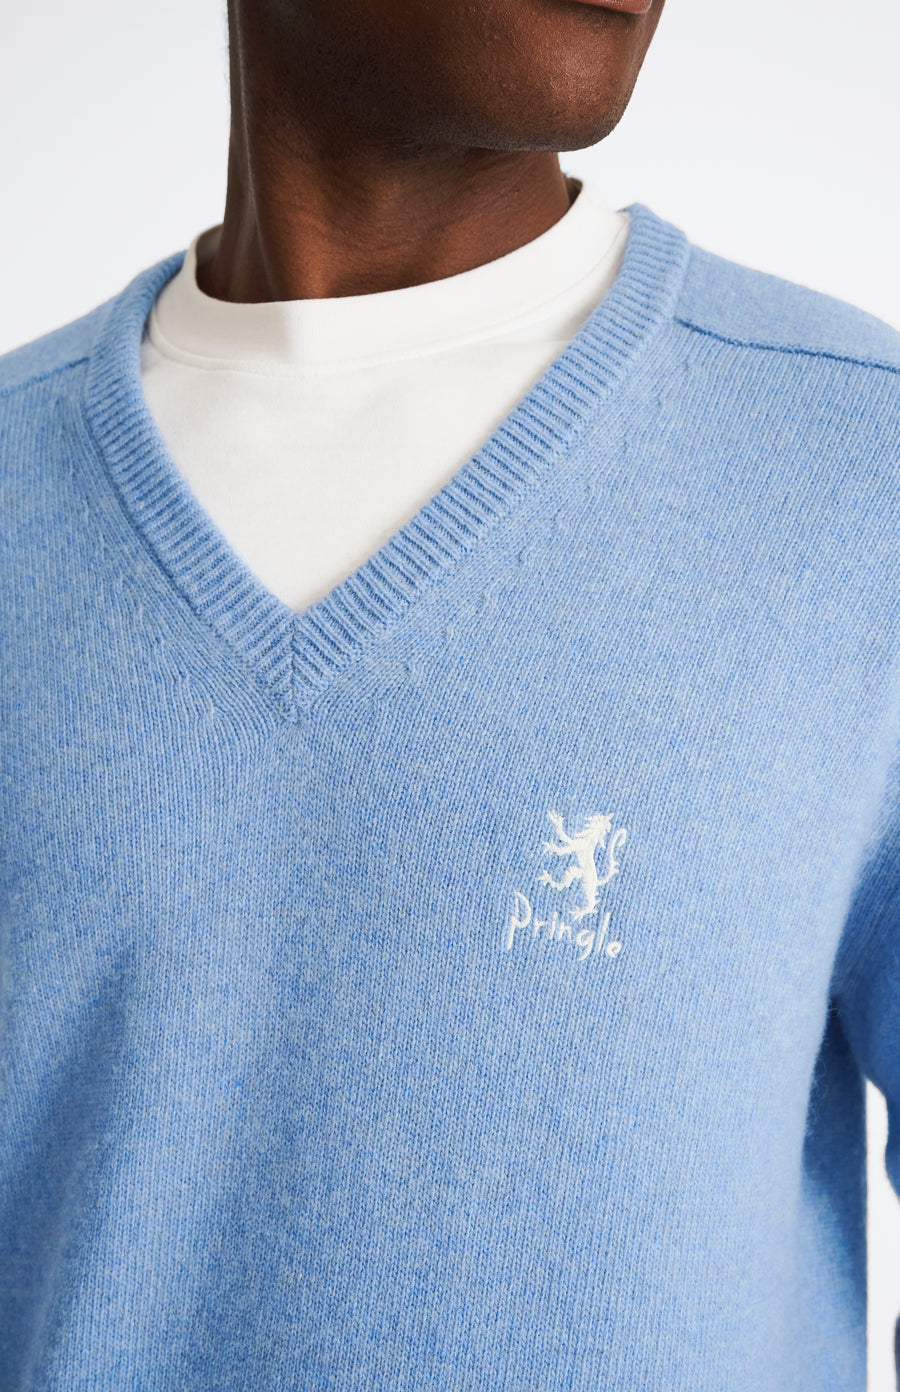 Pringle of Scotland Archive Men's V neck Lambswool Jumper In Carolina Blue showing embroidery